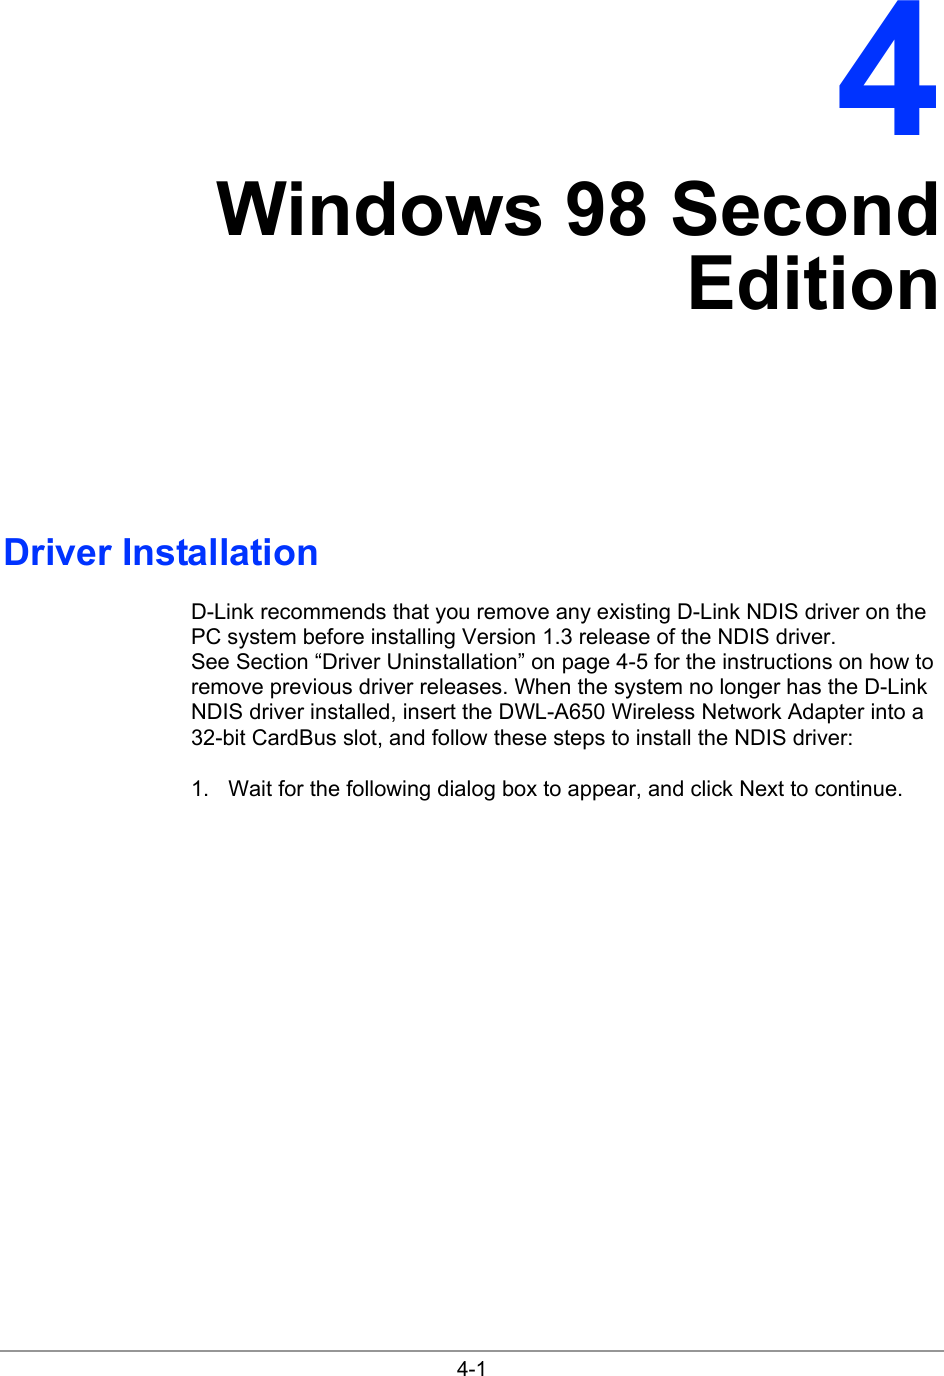  4-1 4 Windows 98 Second Edition Driver Installation D-Link recommends that you remove any existing D-Link NDIS driver on the PC system before installing Version 1.3 release of the NDIS driver. See Section “Driver Uninstallation” on page 4-5 for the instructions on how to remove previous driver releases. When the system no longer has the D-Link NDIS driver installed, insert the DWL-A650 Wireless Network Adapter into a 32-bit CardBus slot, and follow these steps to install the NDIS driver: 1.  Wait for the following dialog box to appear, and click Next to continue. 